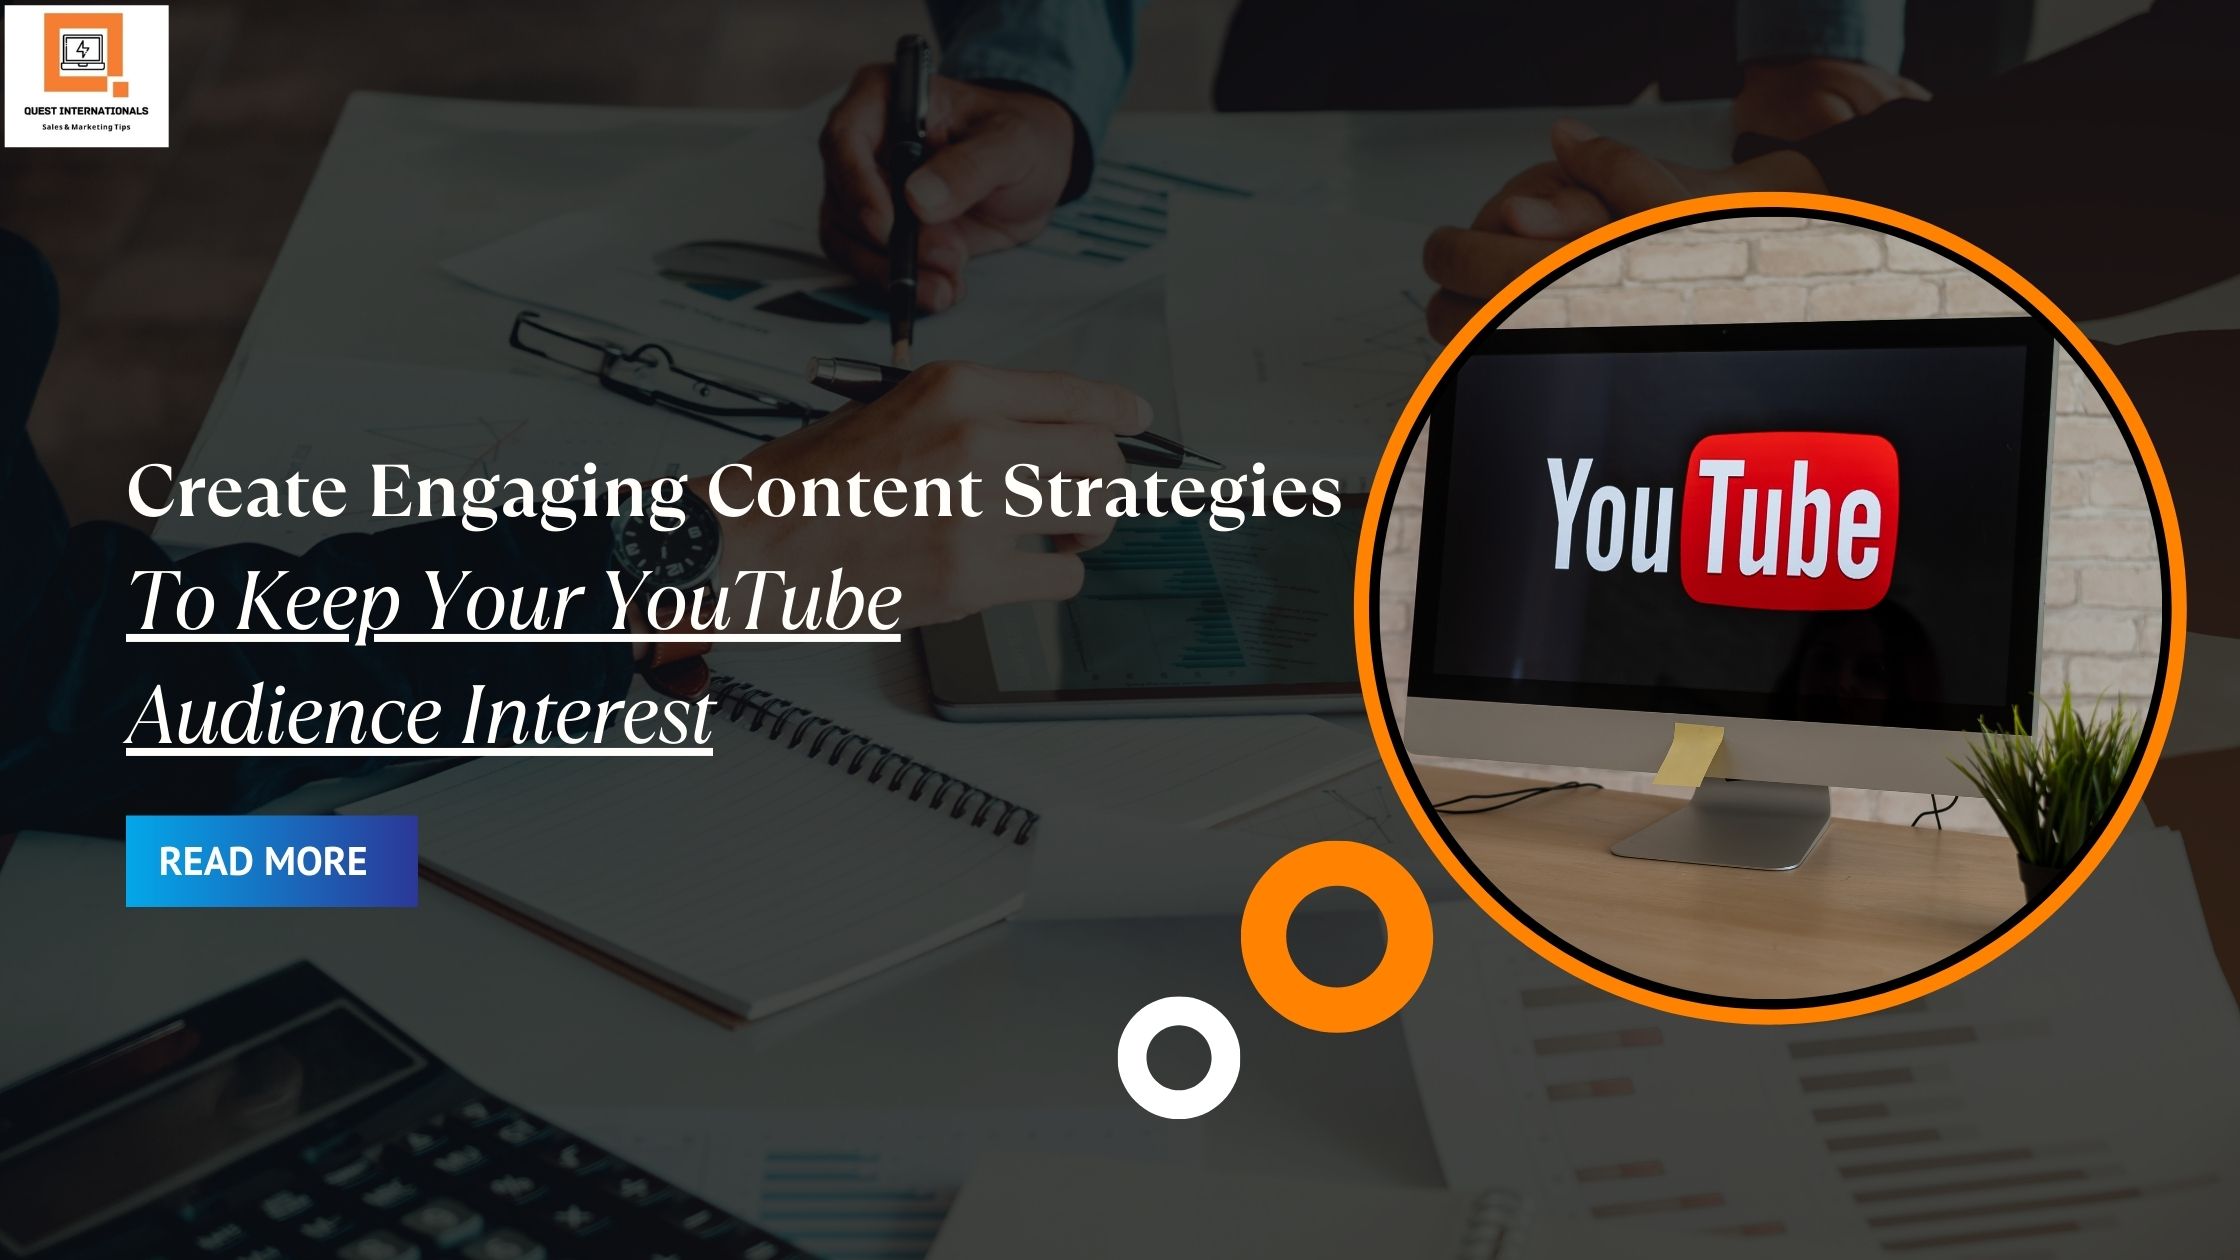 You are currently viewing Create Engaging Content Strategies to Keep Your YouTube Audience Interest